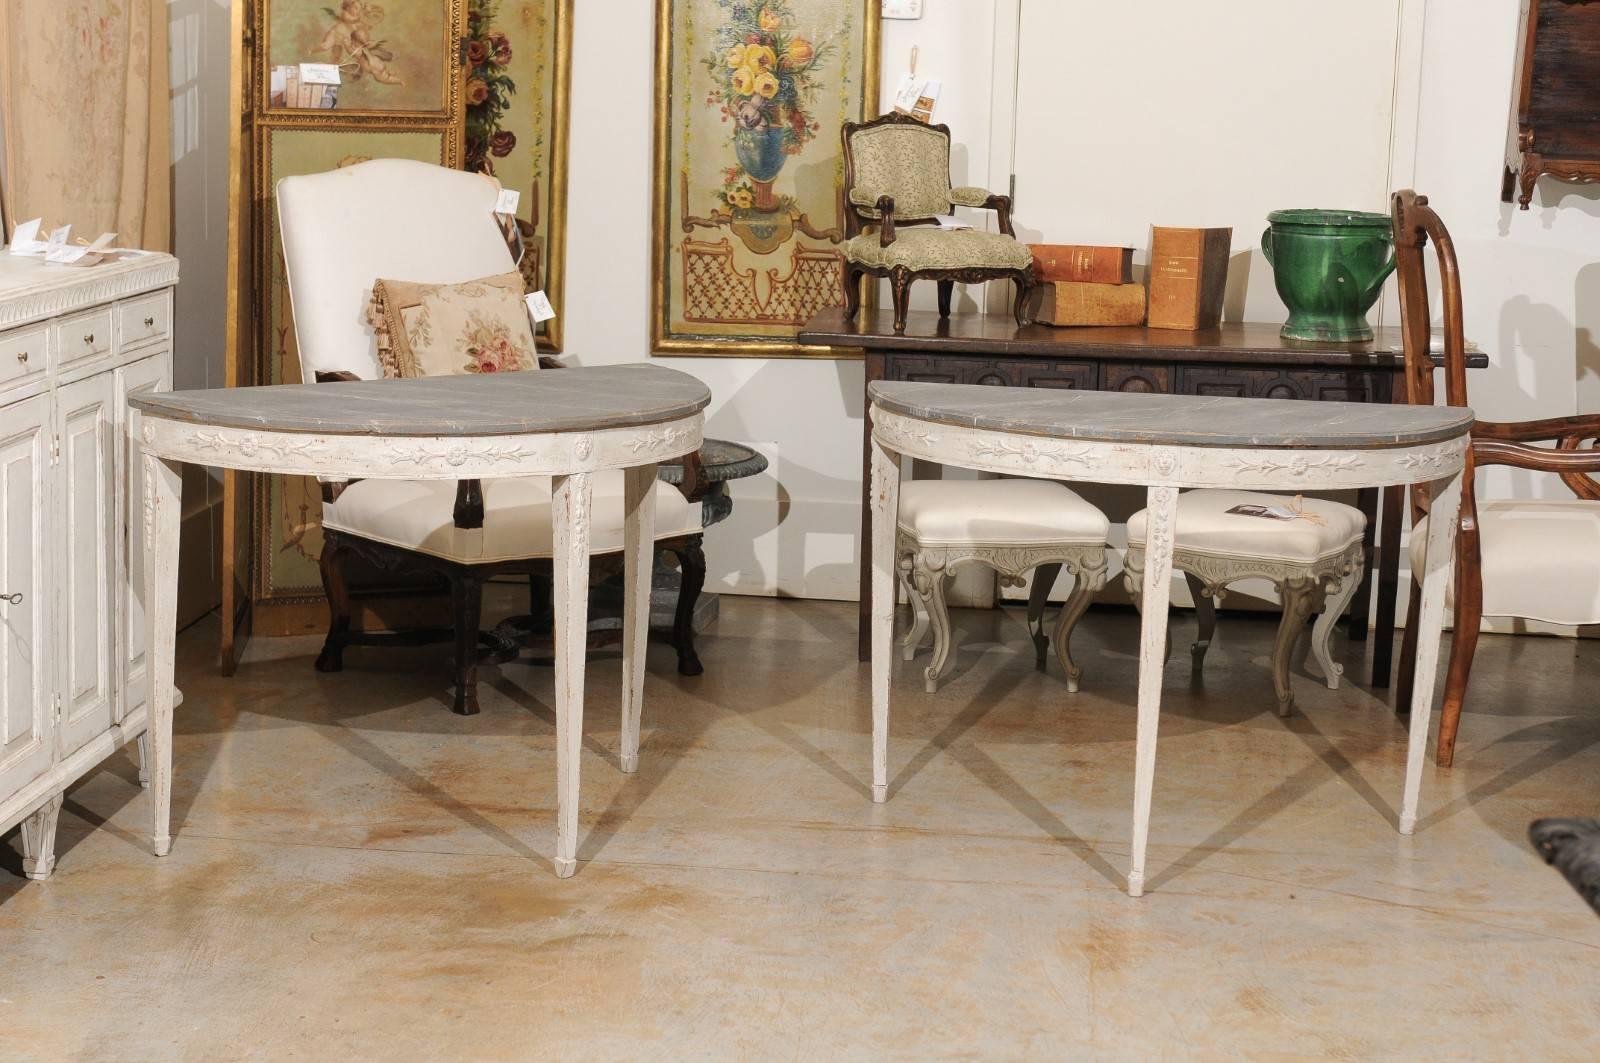 A pair of Swedish neoclassical period painted wood demilune console tables from the early 19th century with marbleized tops, carved aprons and tapered legs. Each of this pair of Swedish demilune features a grey veined faux-marble semi-circular top